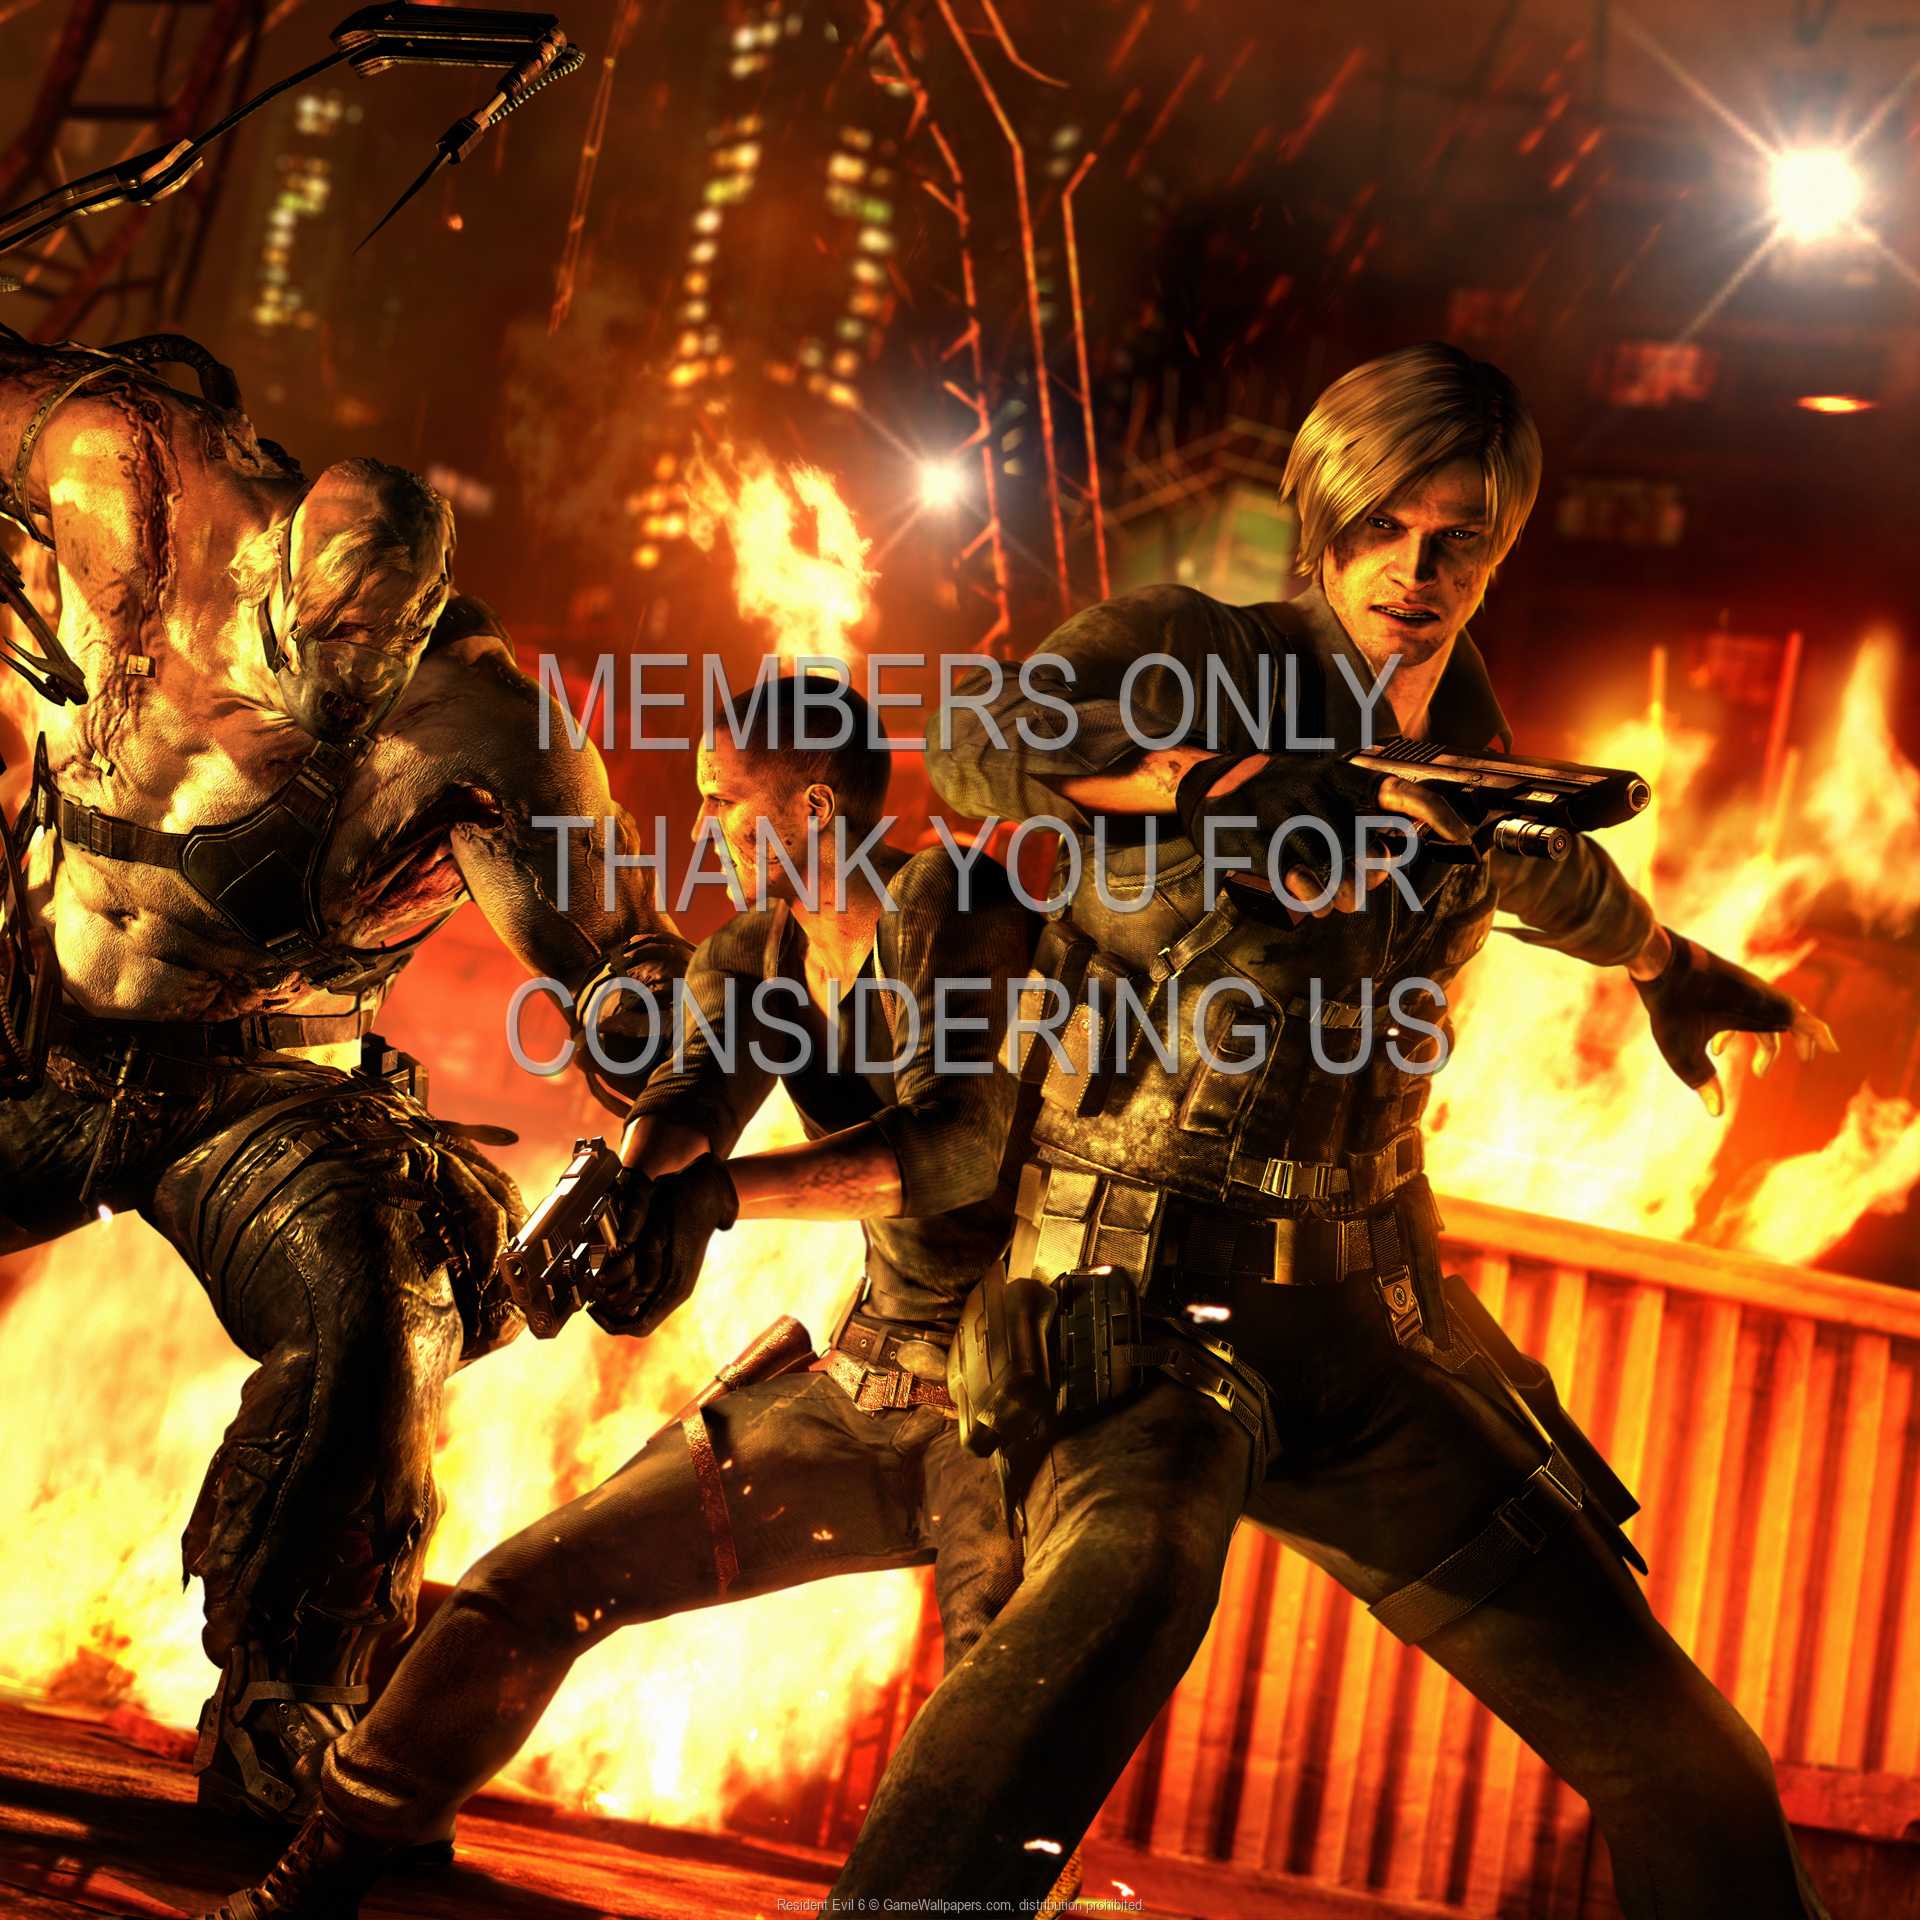 resident evil game Wallpapers